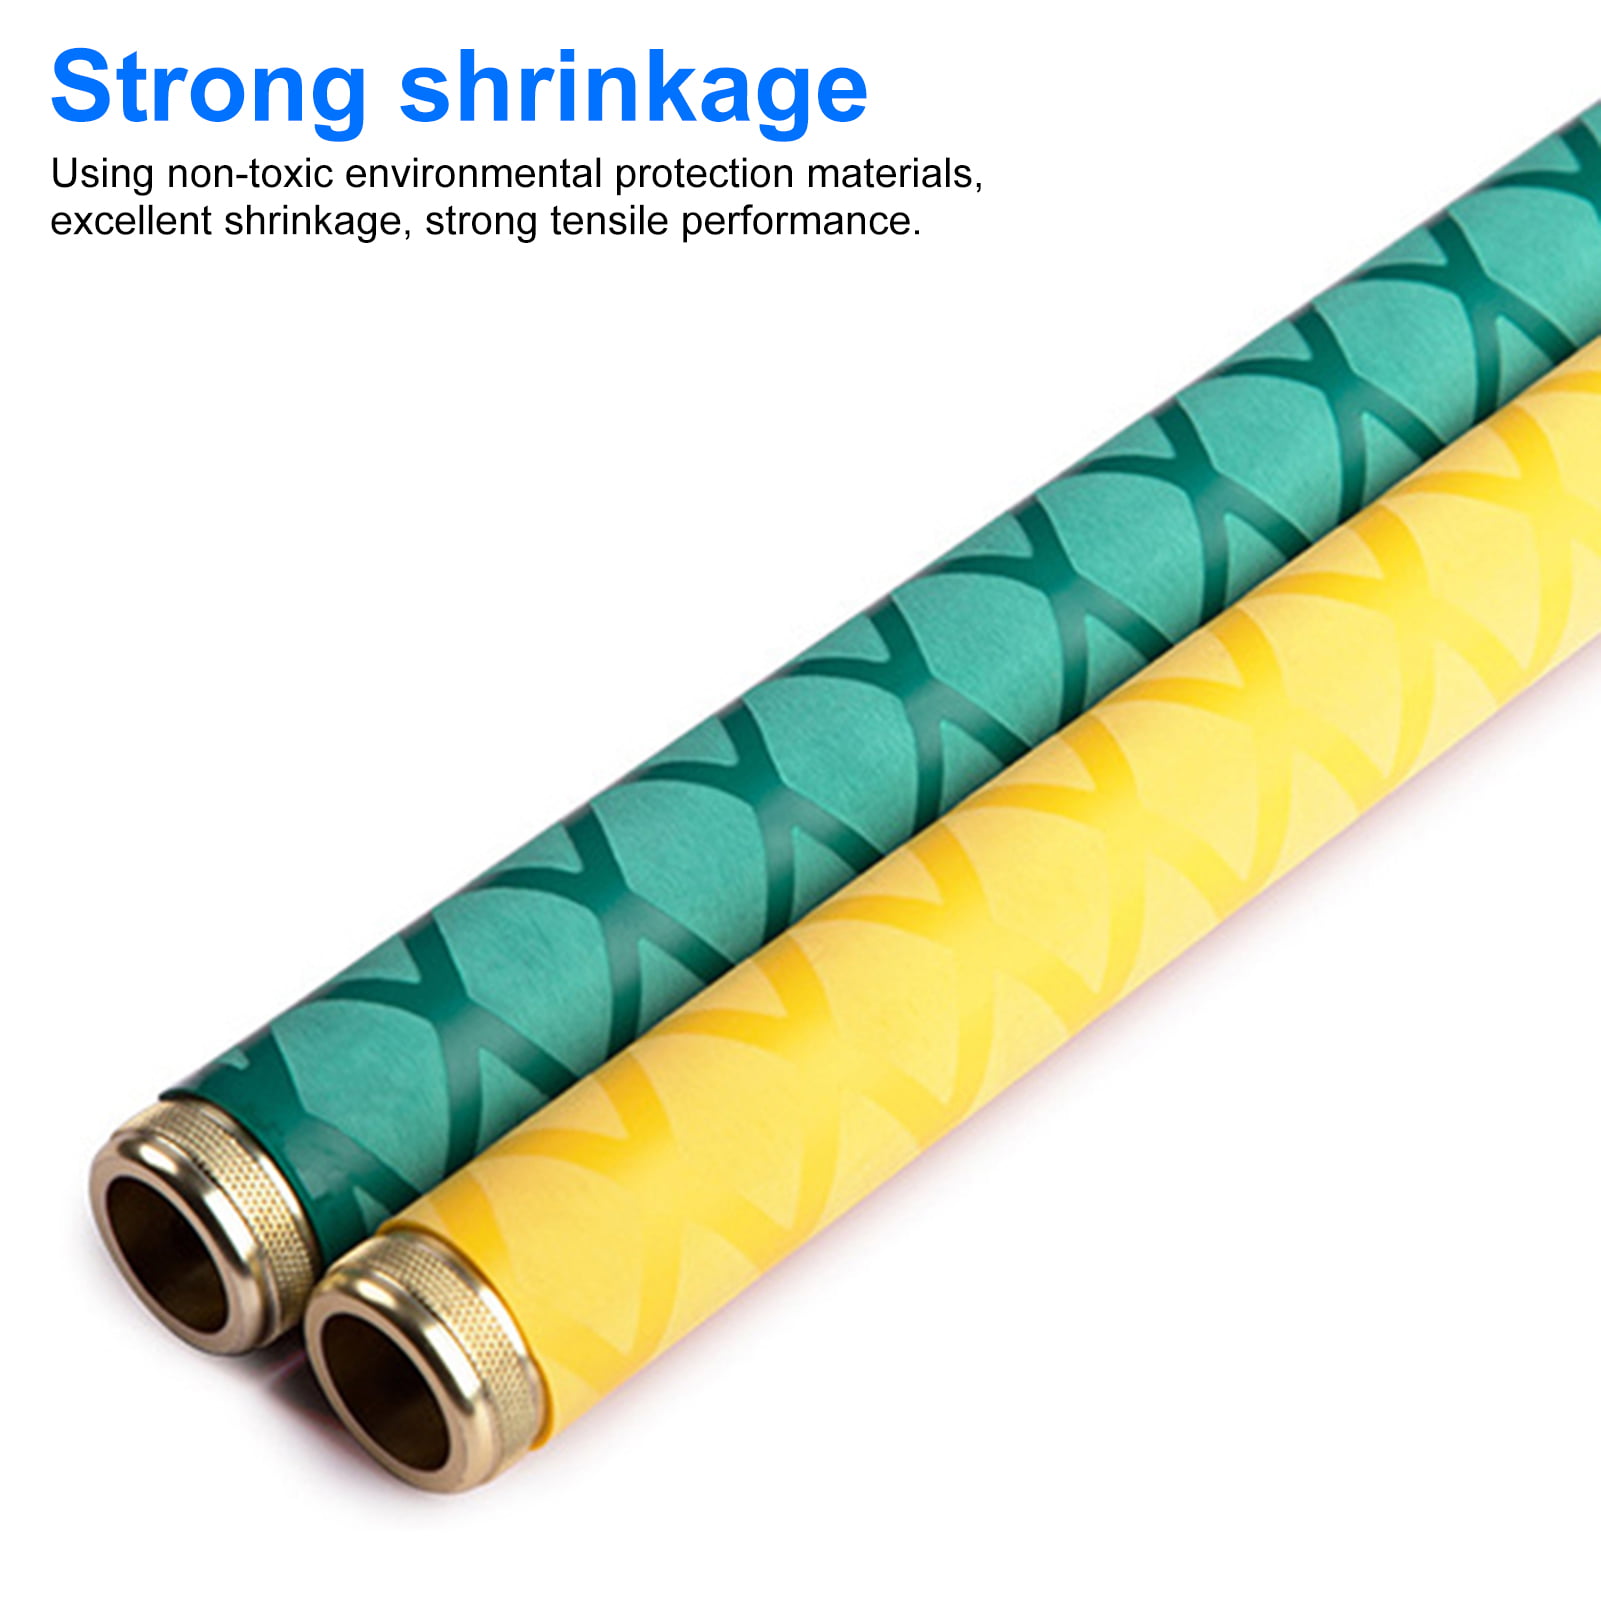 Details about   1X 1m Anti-slip Fishing Rod Grip Heat Shrink Sleeve Wrap Tube Protective Cover 